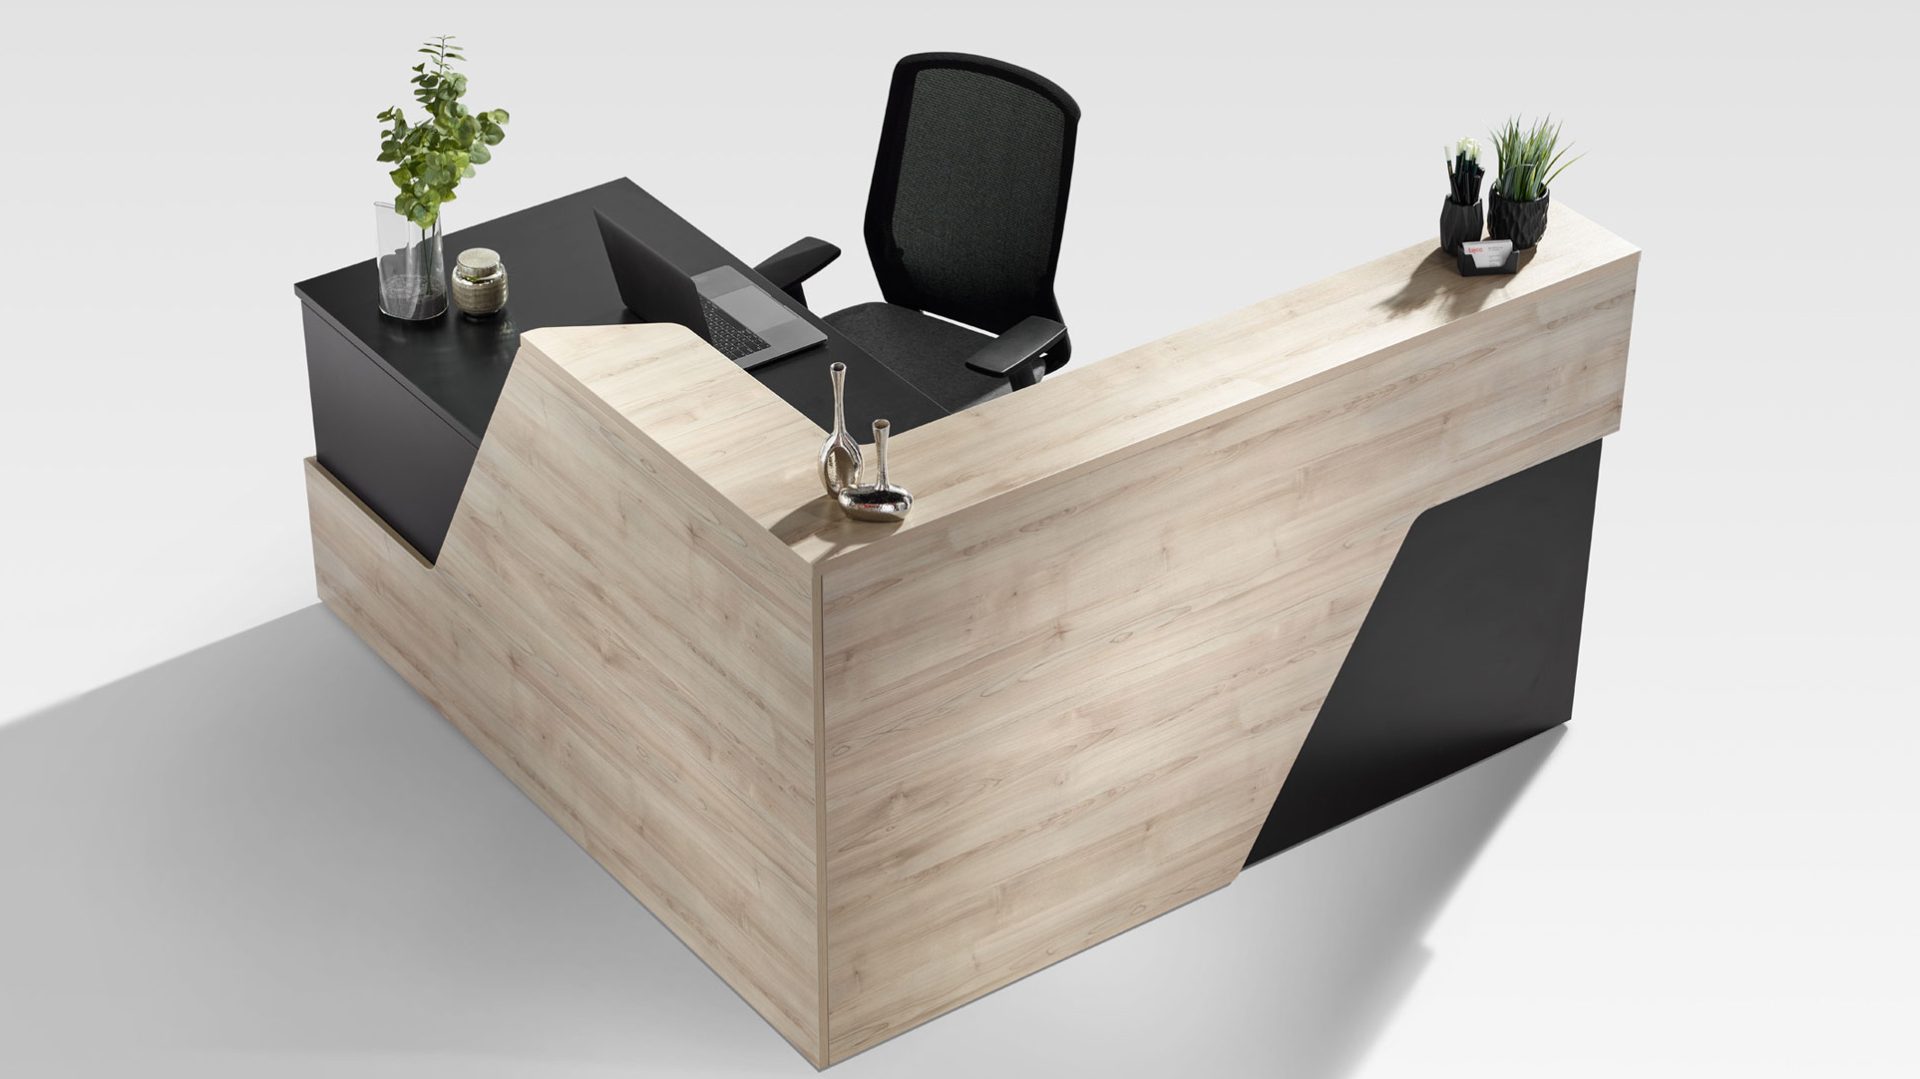 <h1>Choosing the Right Reception Desk For Your Office</h1>